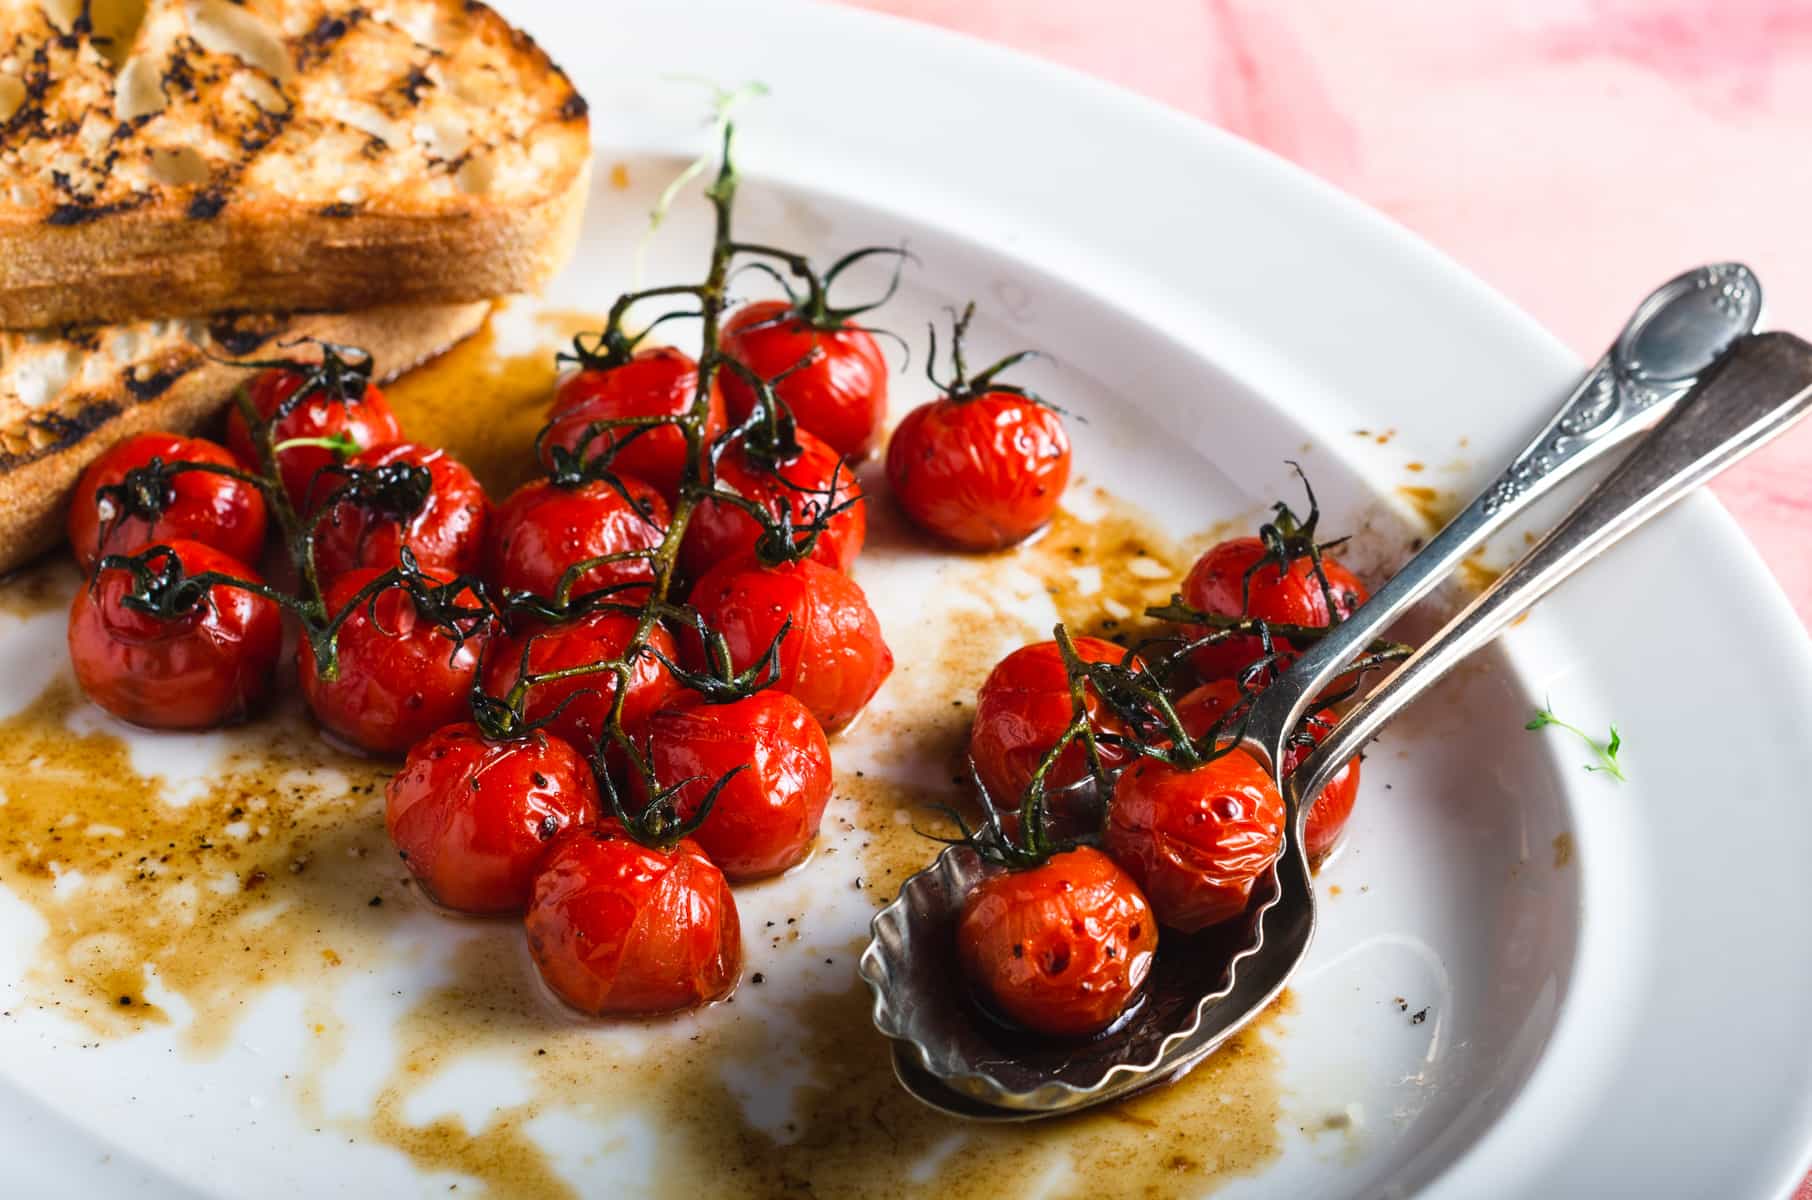 Oven roasted vine tomatoes glazed with a balsamic dressing on a white platter.